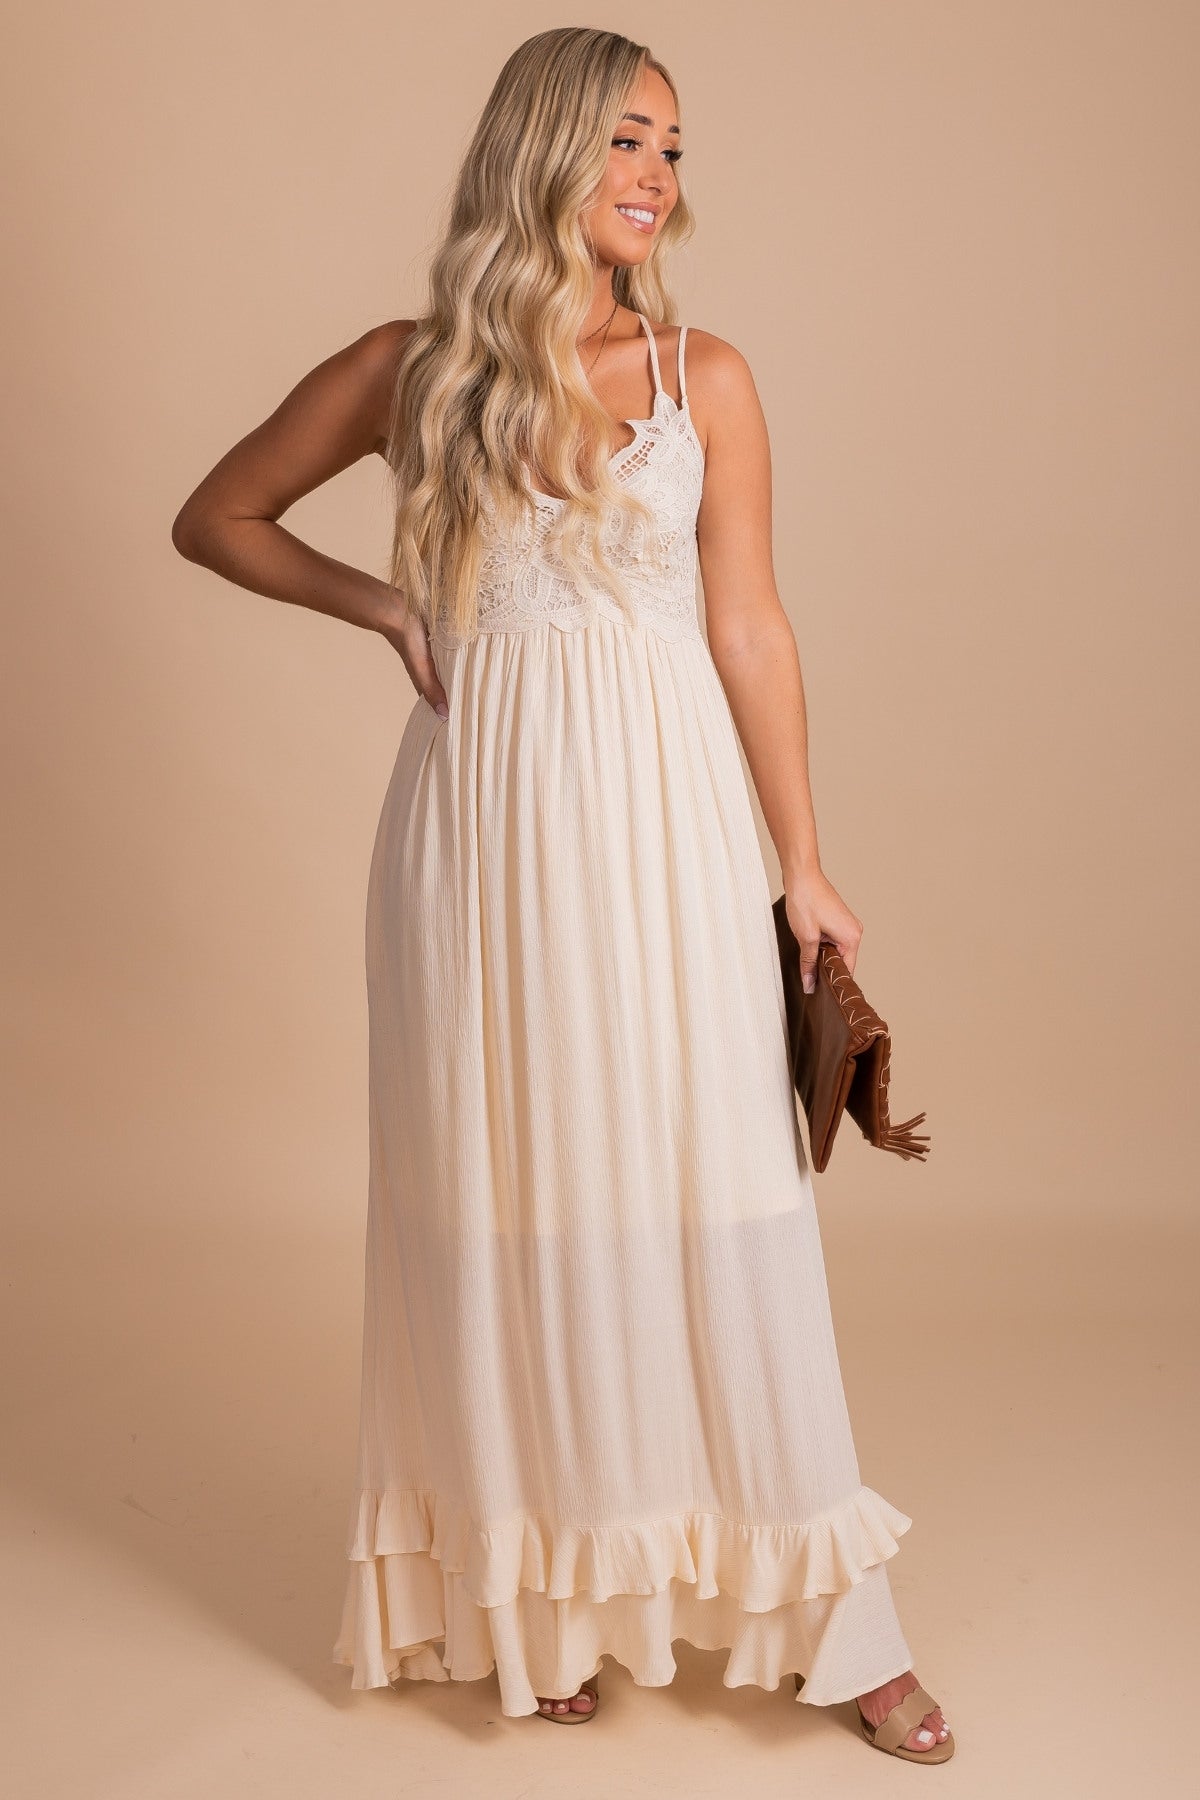 Women's Long Dress in Cream for Special Occasions